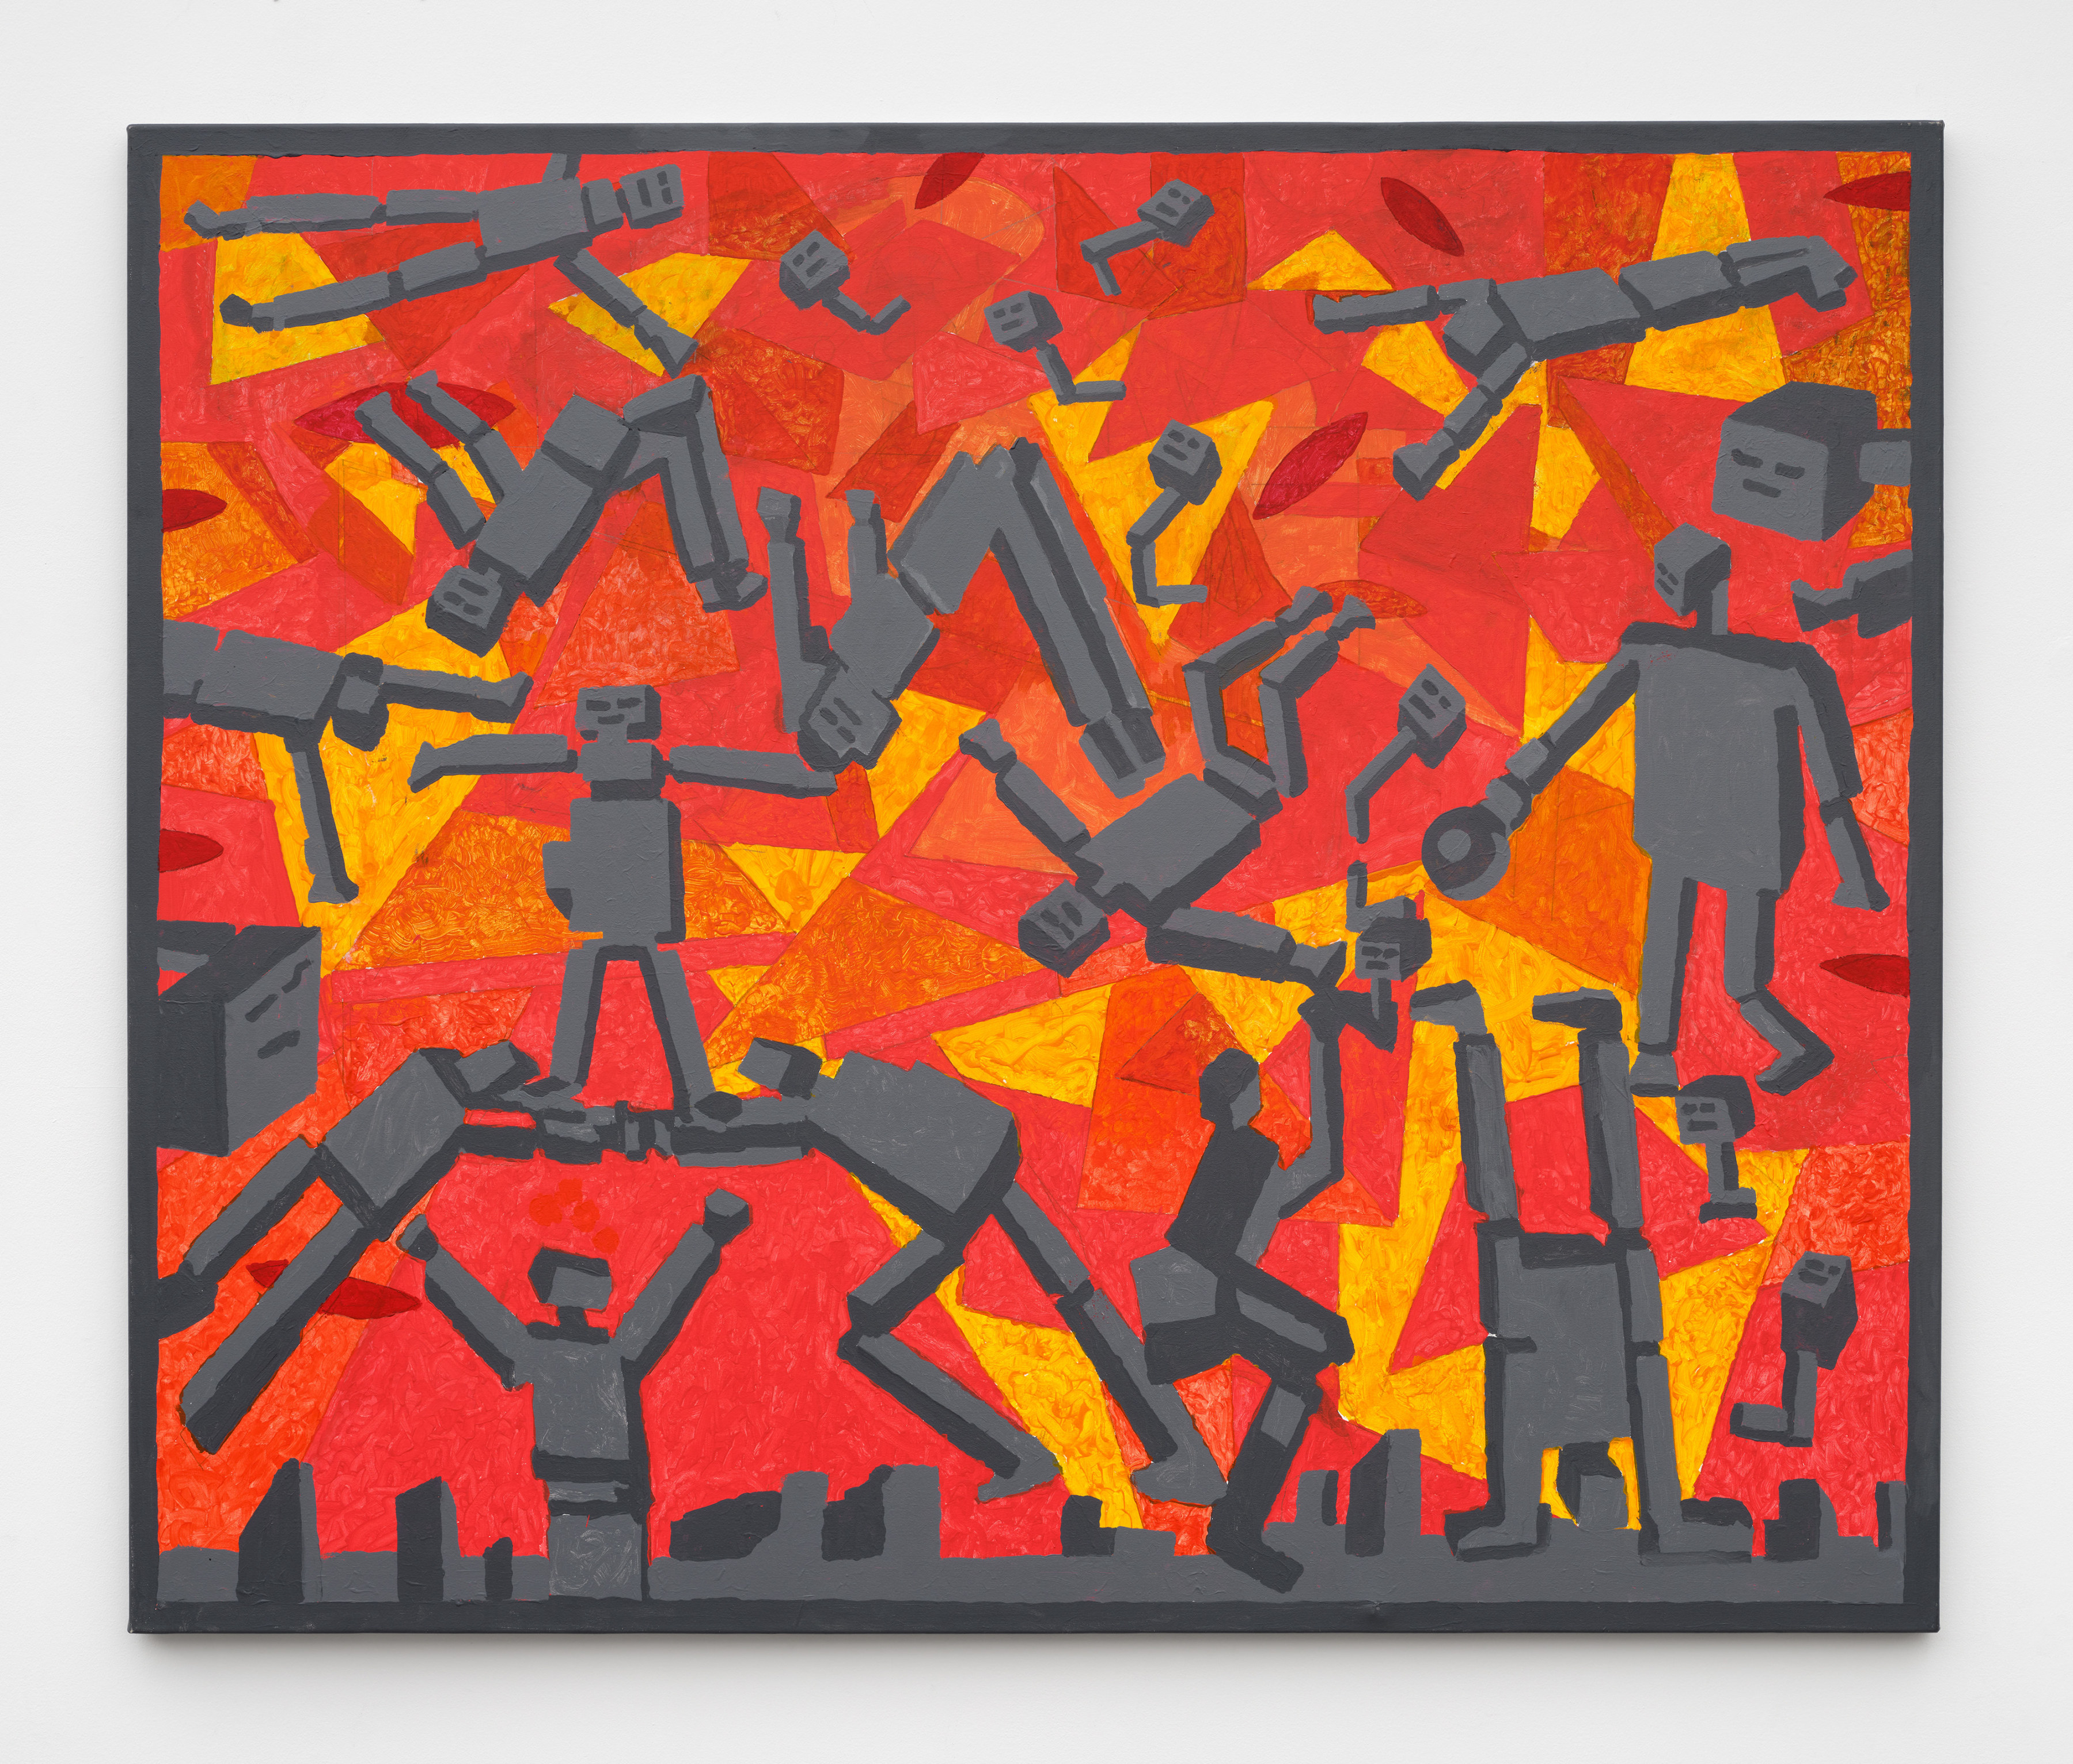 A painting with grey robots holding each other up and falling against a red, yellow and orange background.